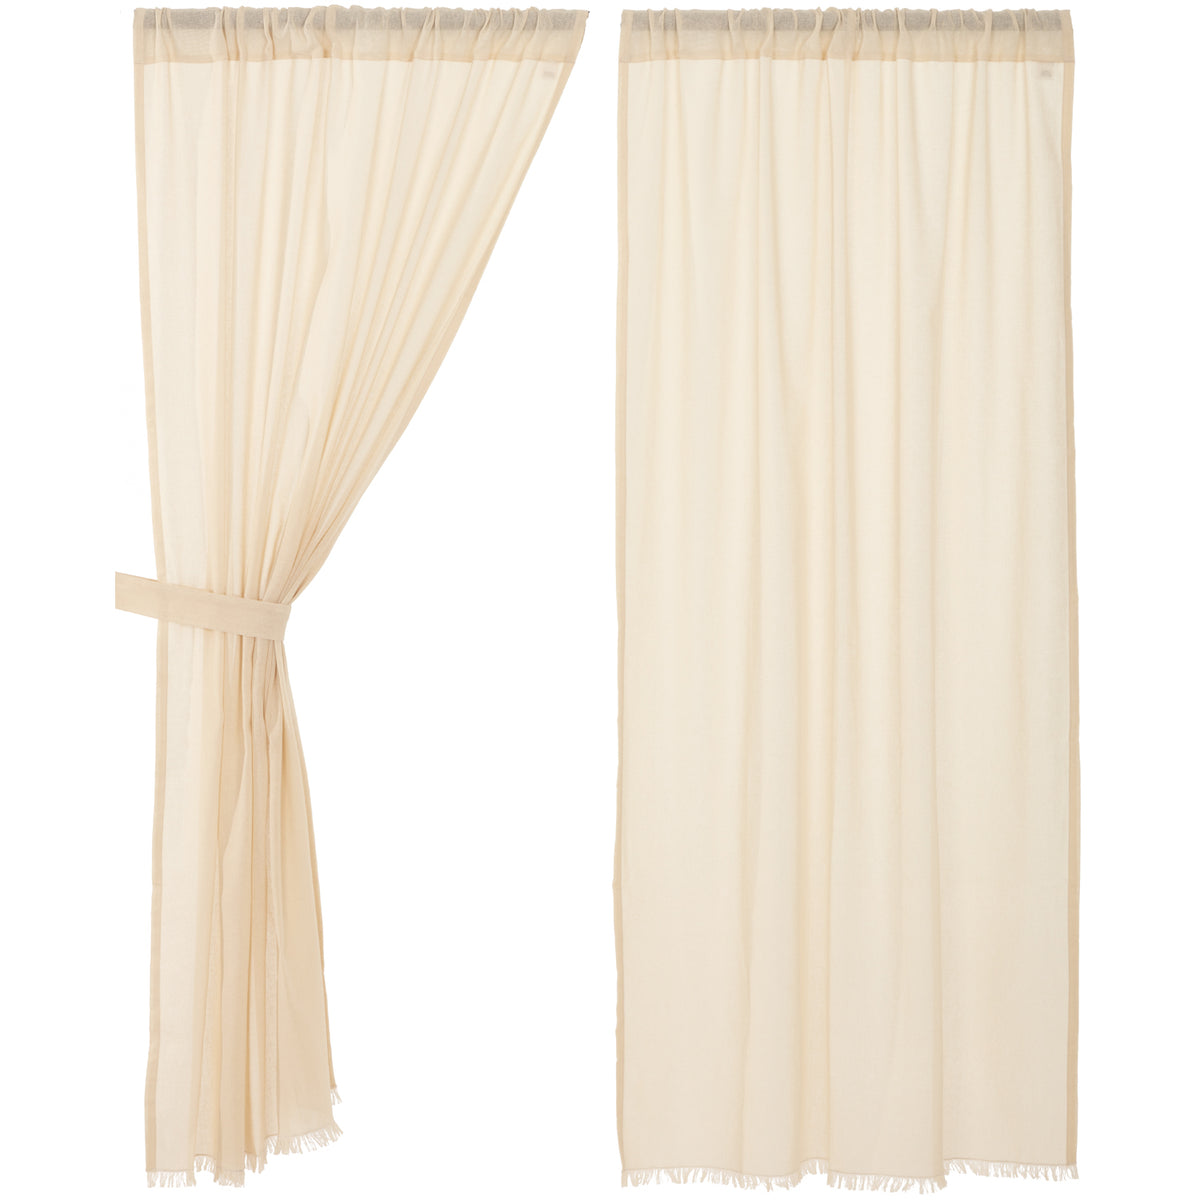 April & Olive Tobacco Cloth Natural Short Panel Fringed Set of 2 63x36 By VHC Brands